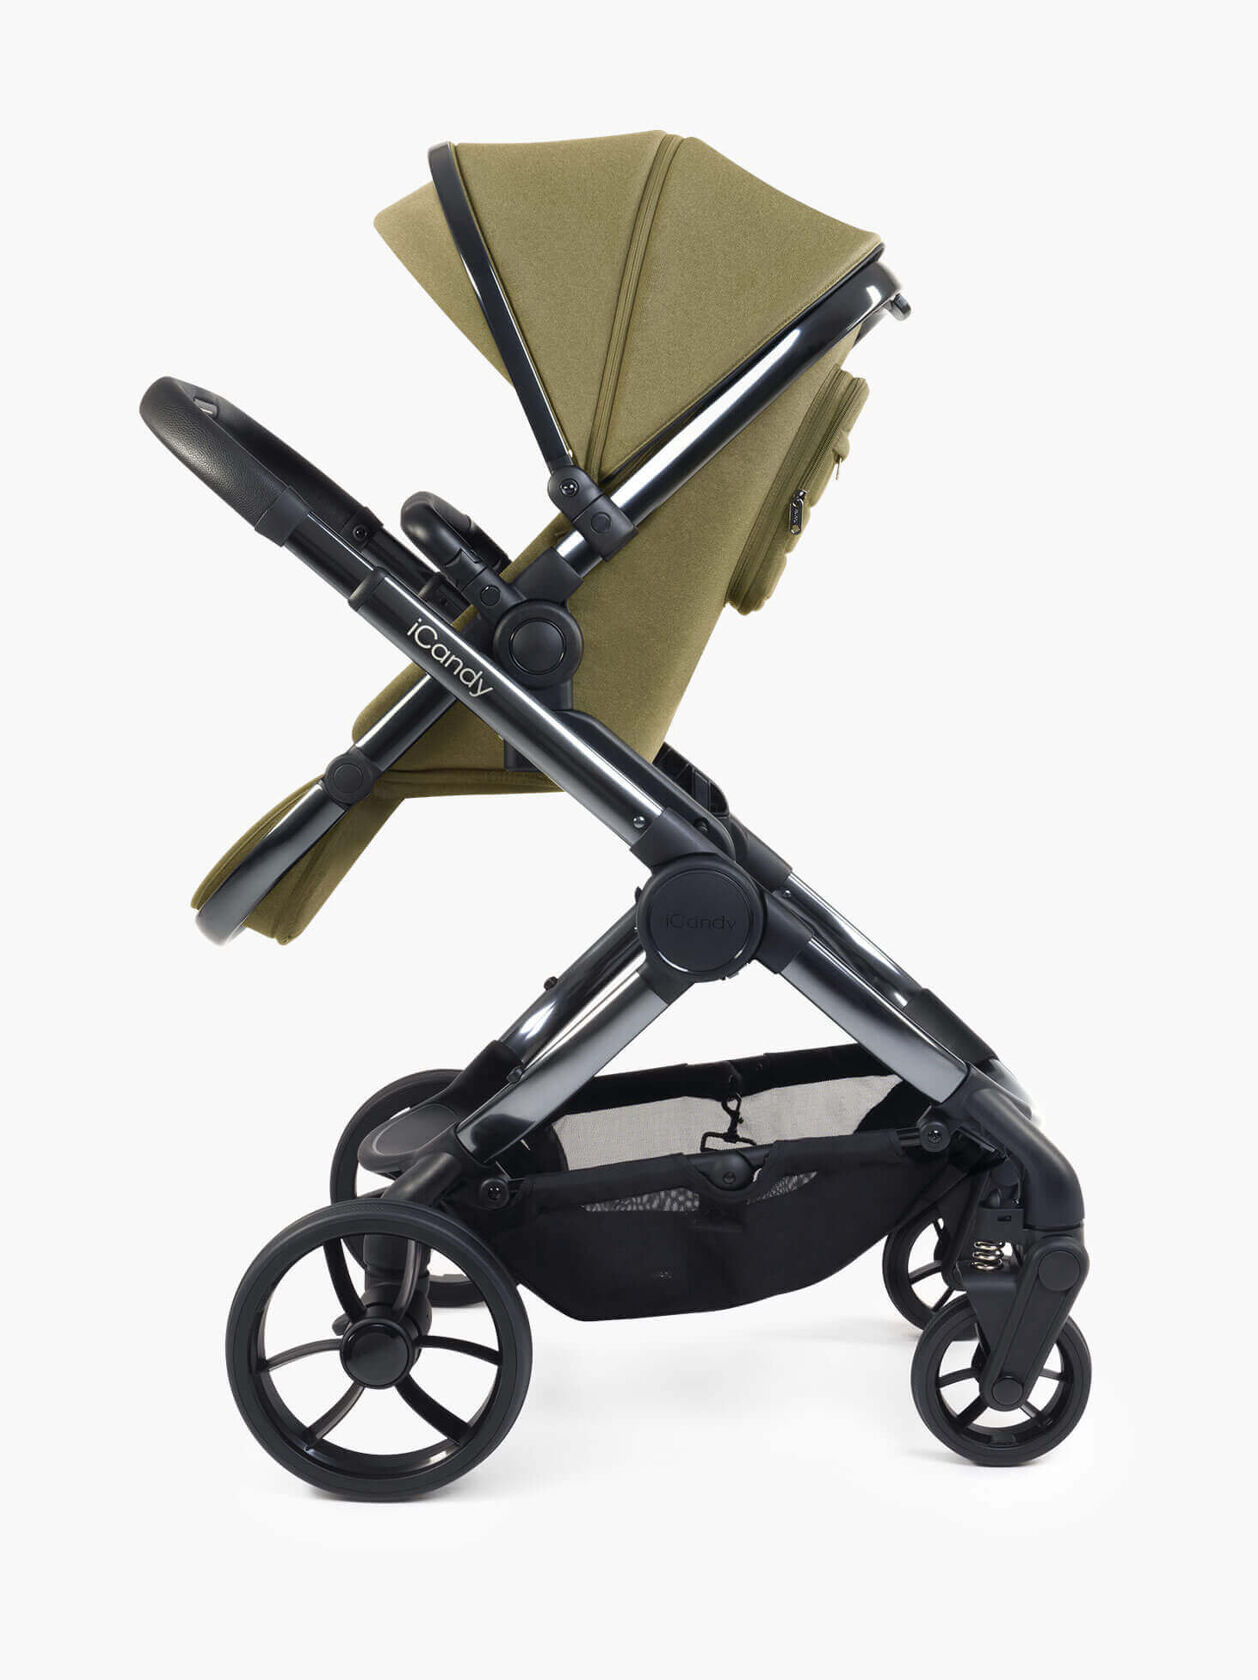 Peach 7 Pushchair and Carrycot